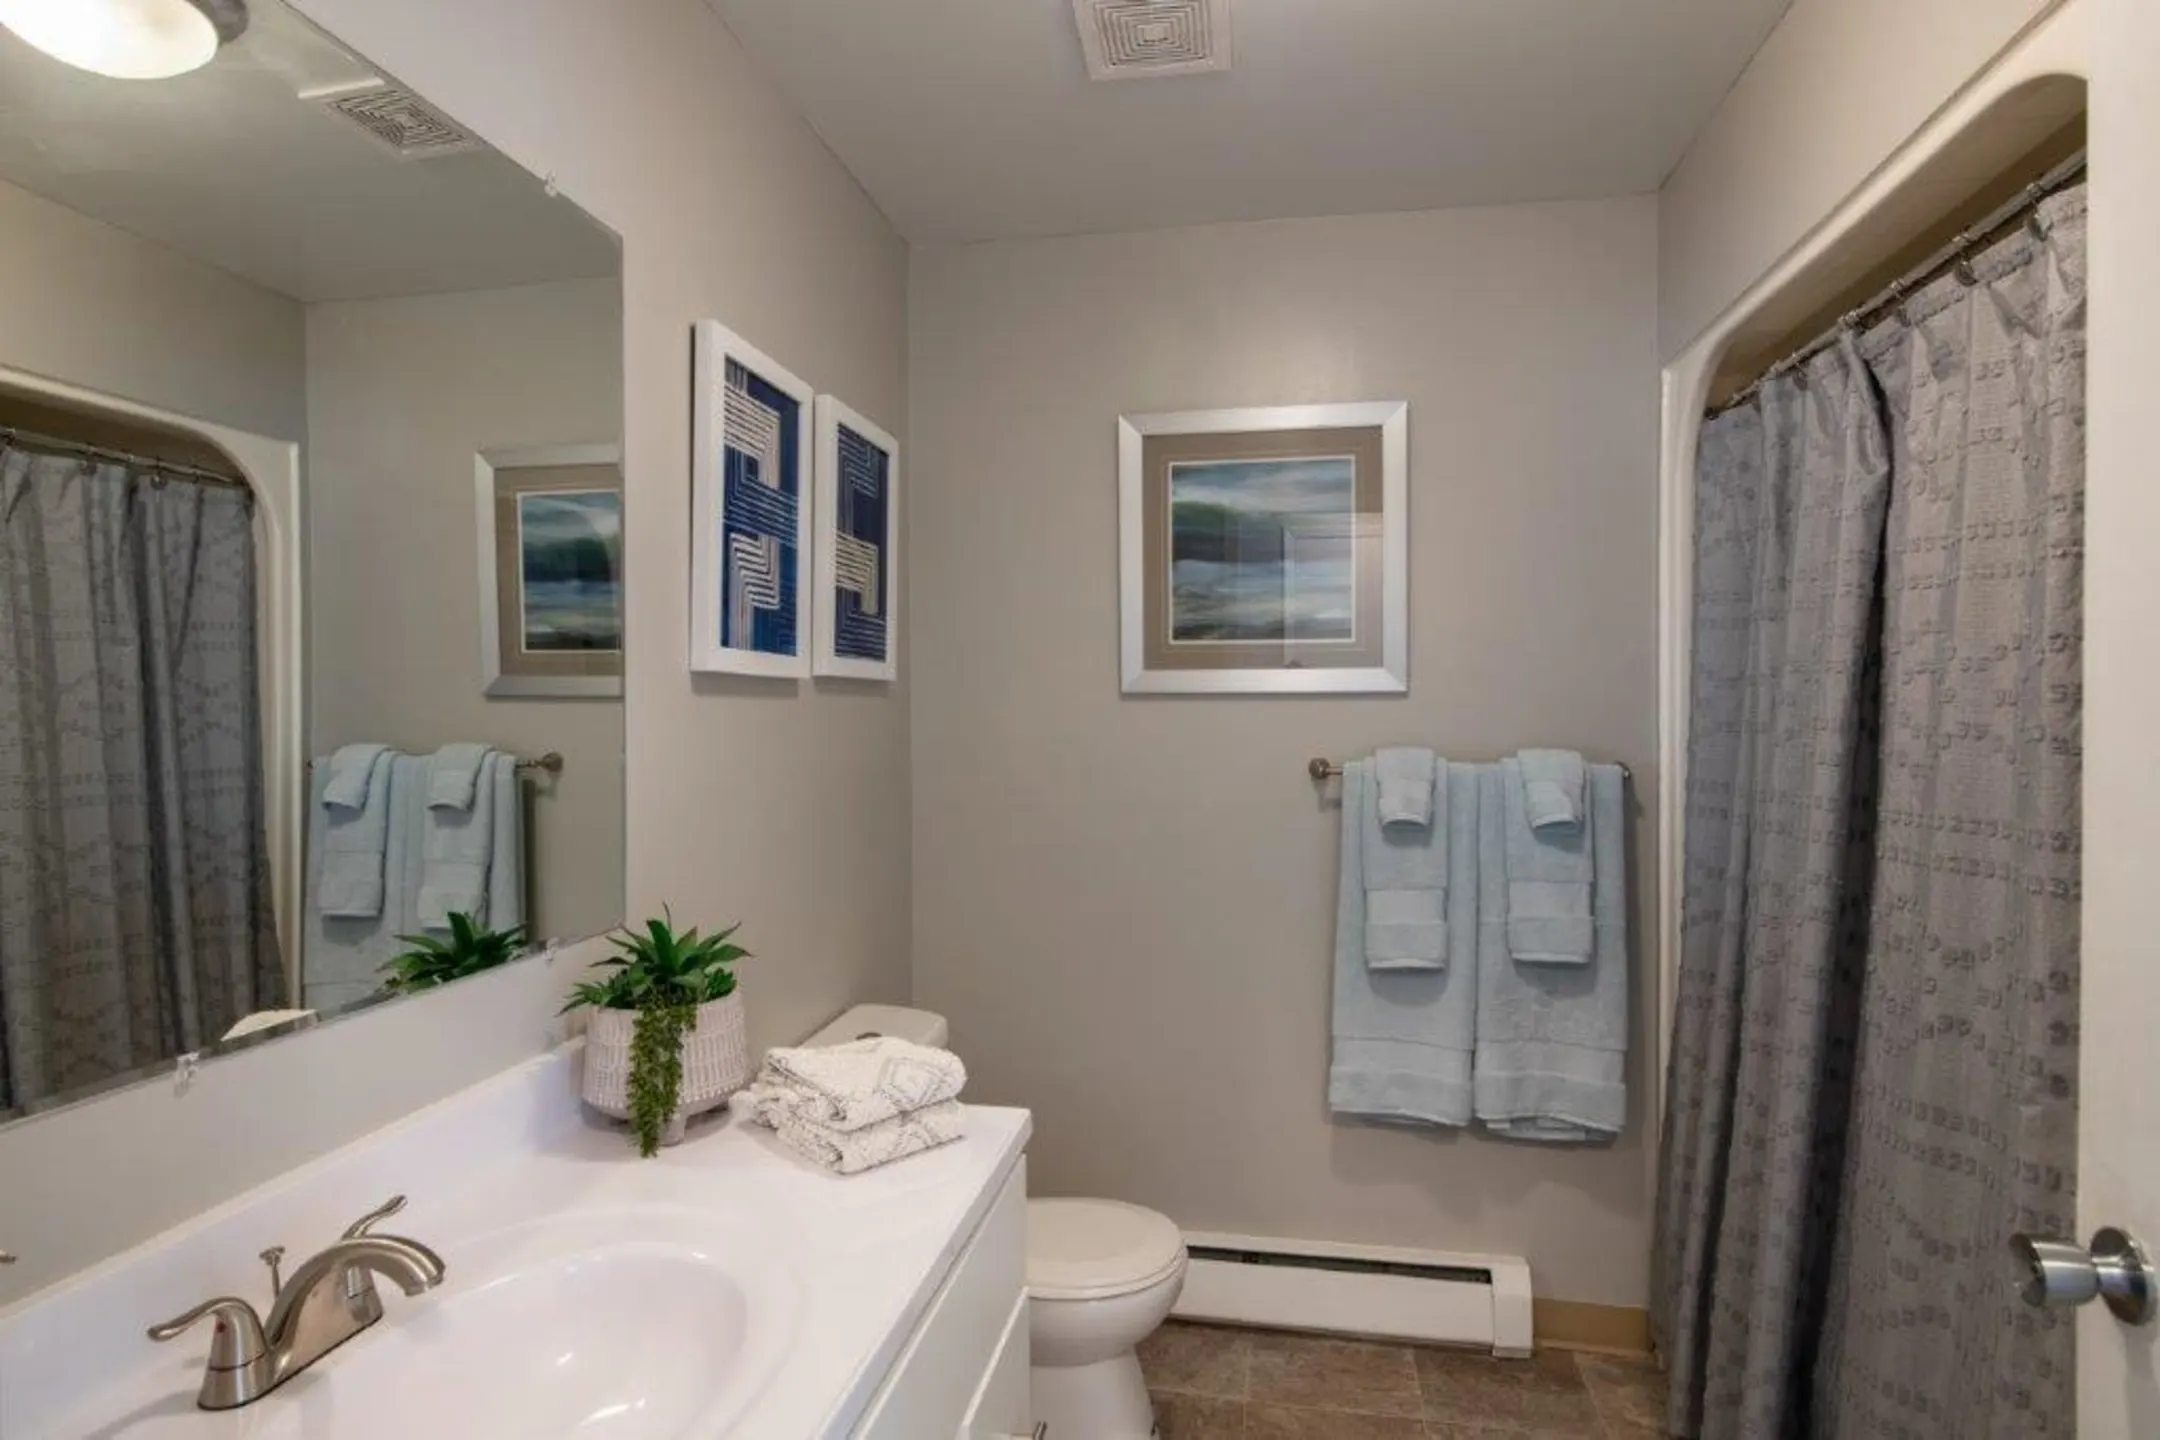 Bathroom - Imperial Gardens Apartment Homes - Middletown, NY